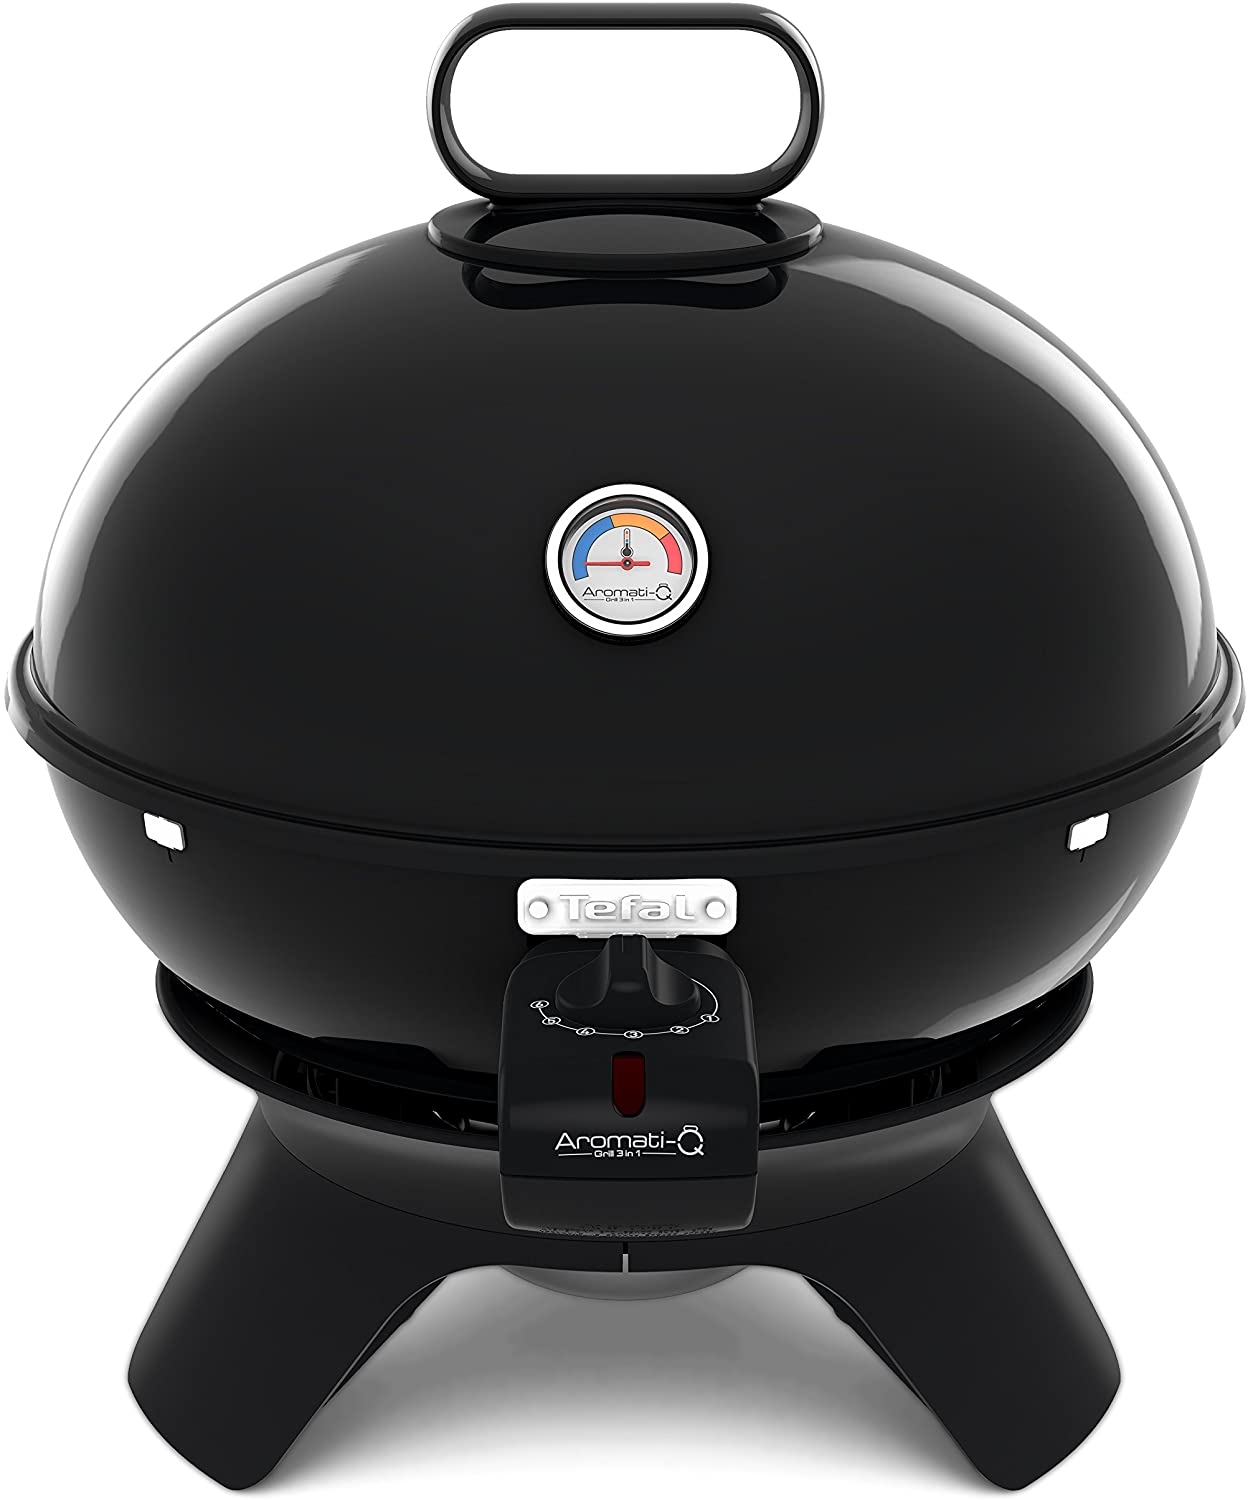 Tefal BG9108 Aromati-Q 3-in-1 Electric Kettle Barbecue for Grilling, Roasting and Smoking, Desk Version